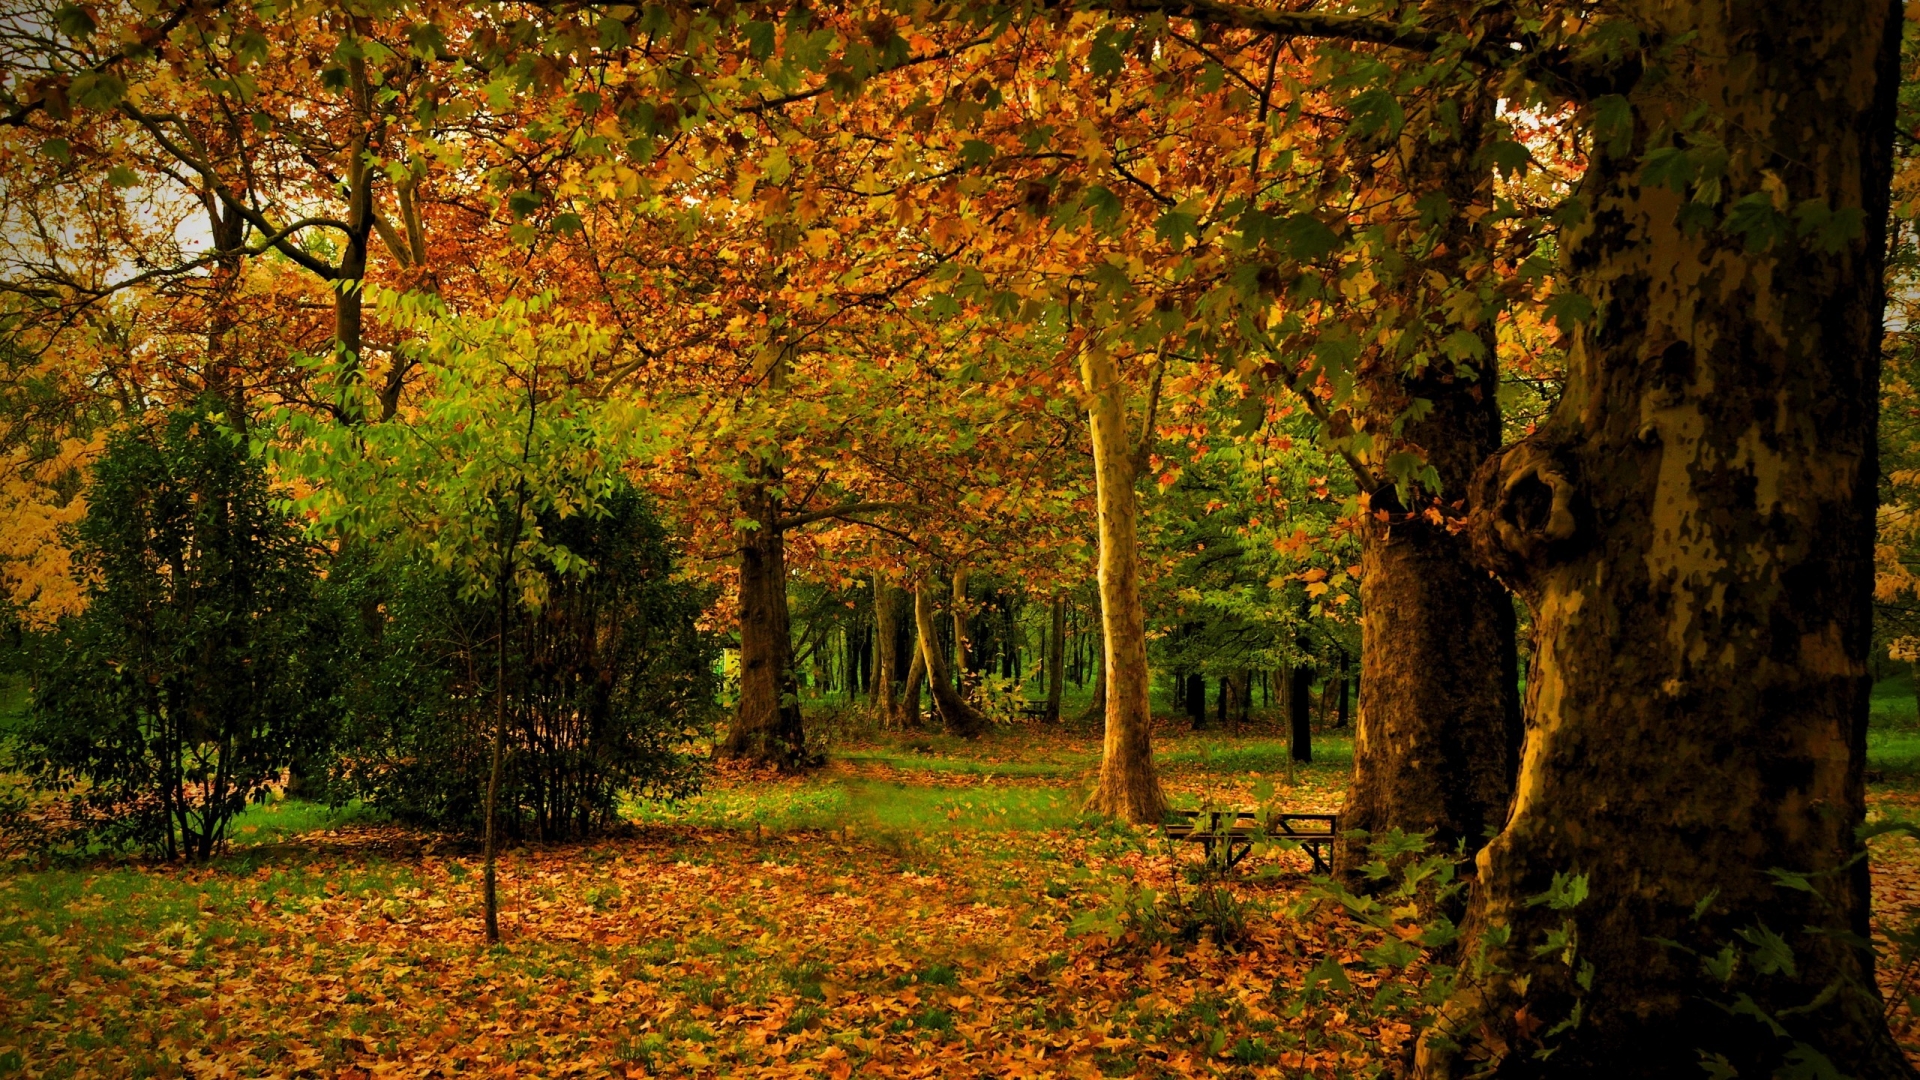 Just Autumn Time for 1920 x 1080 HDTV 1080p resolution